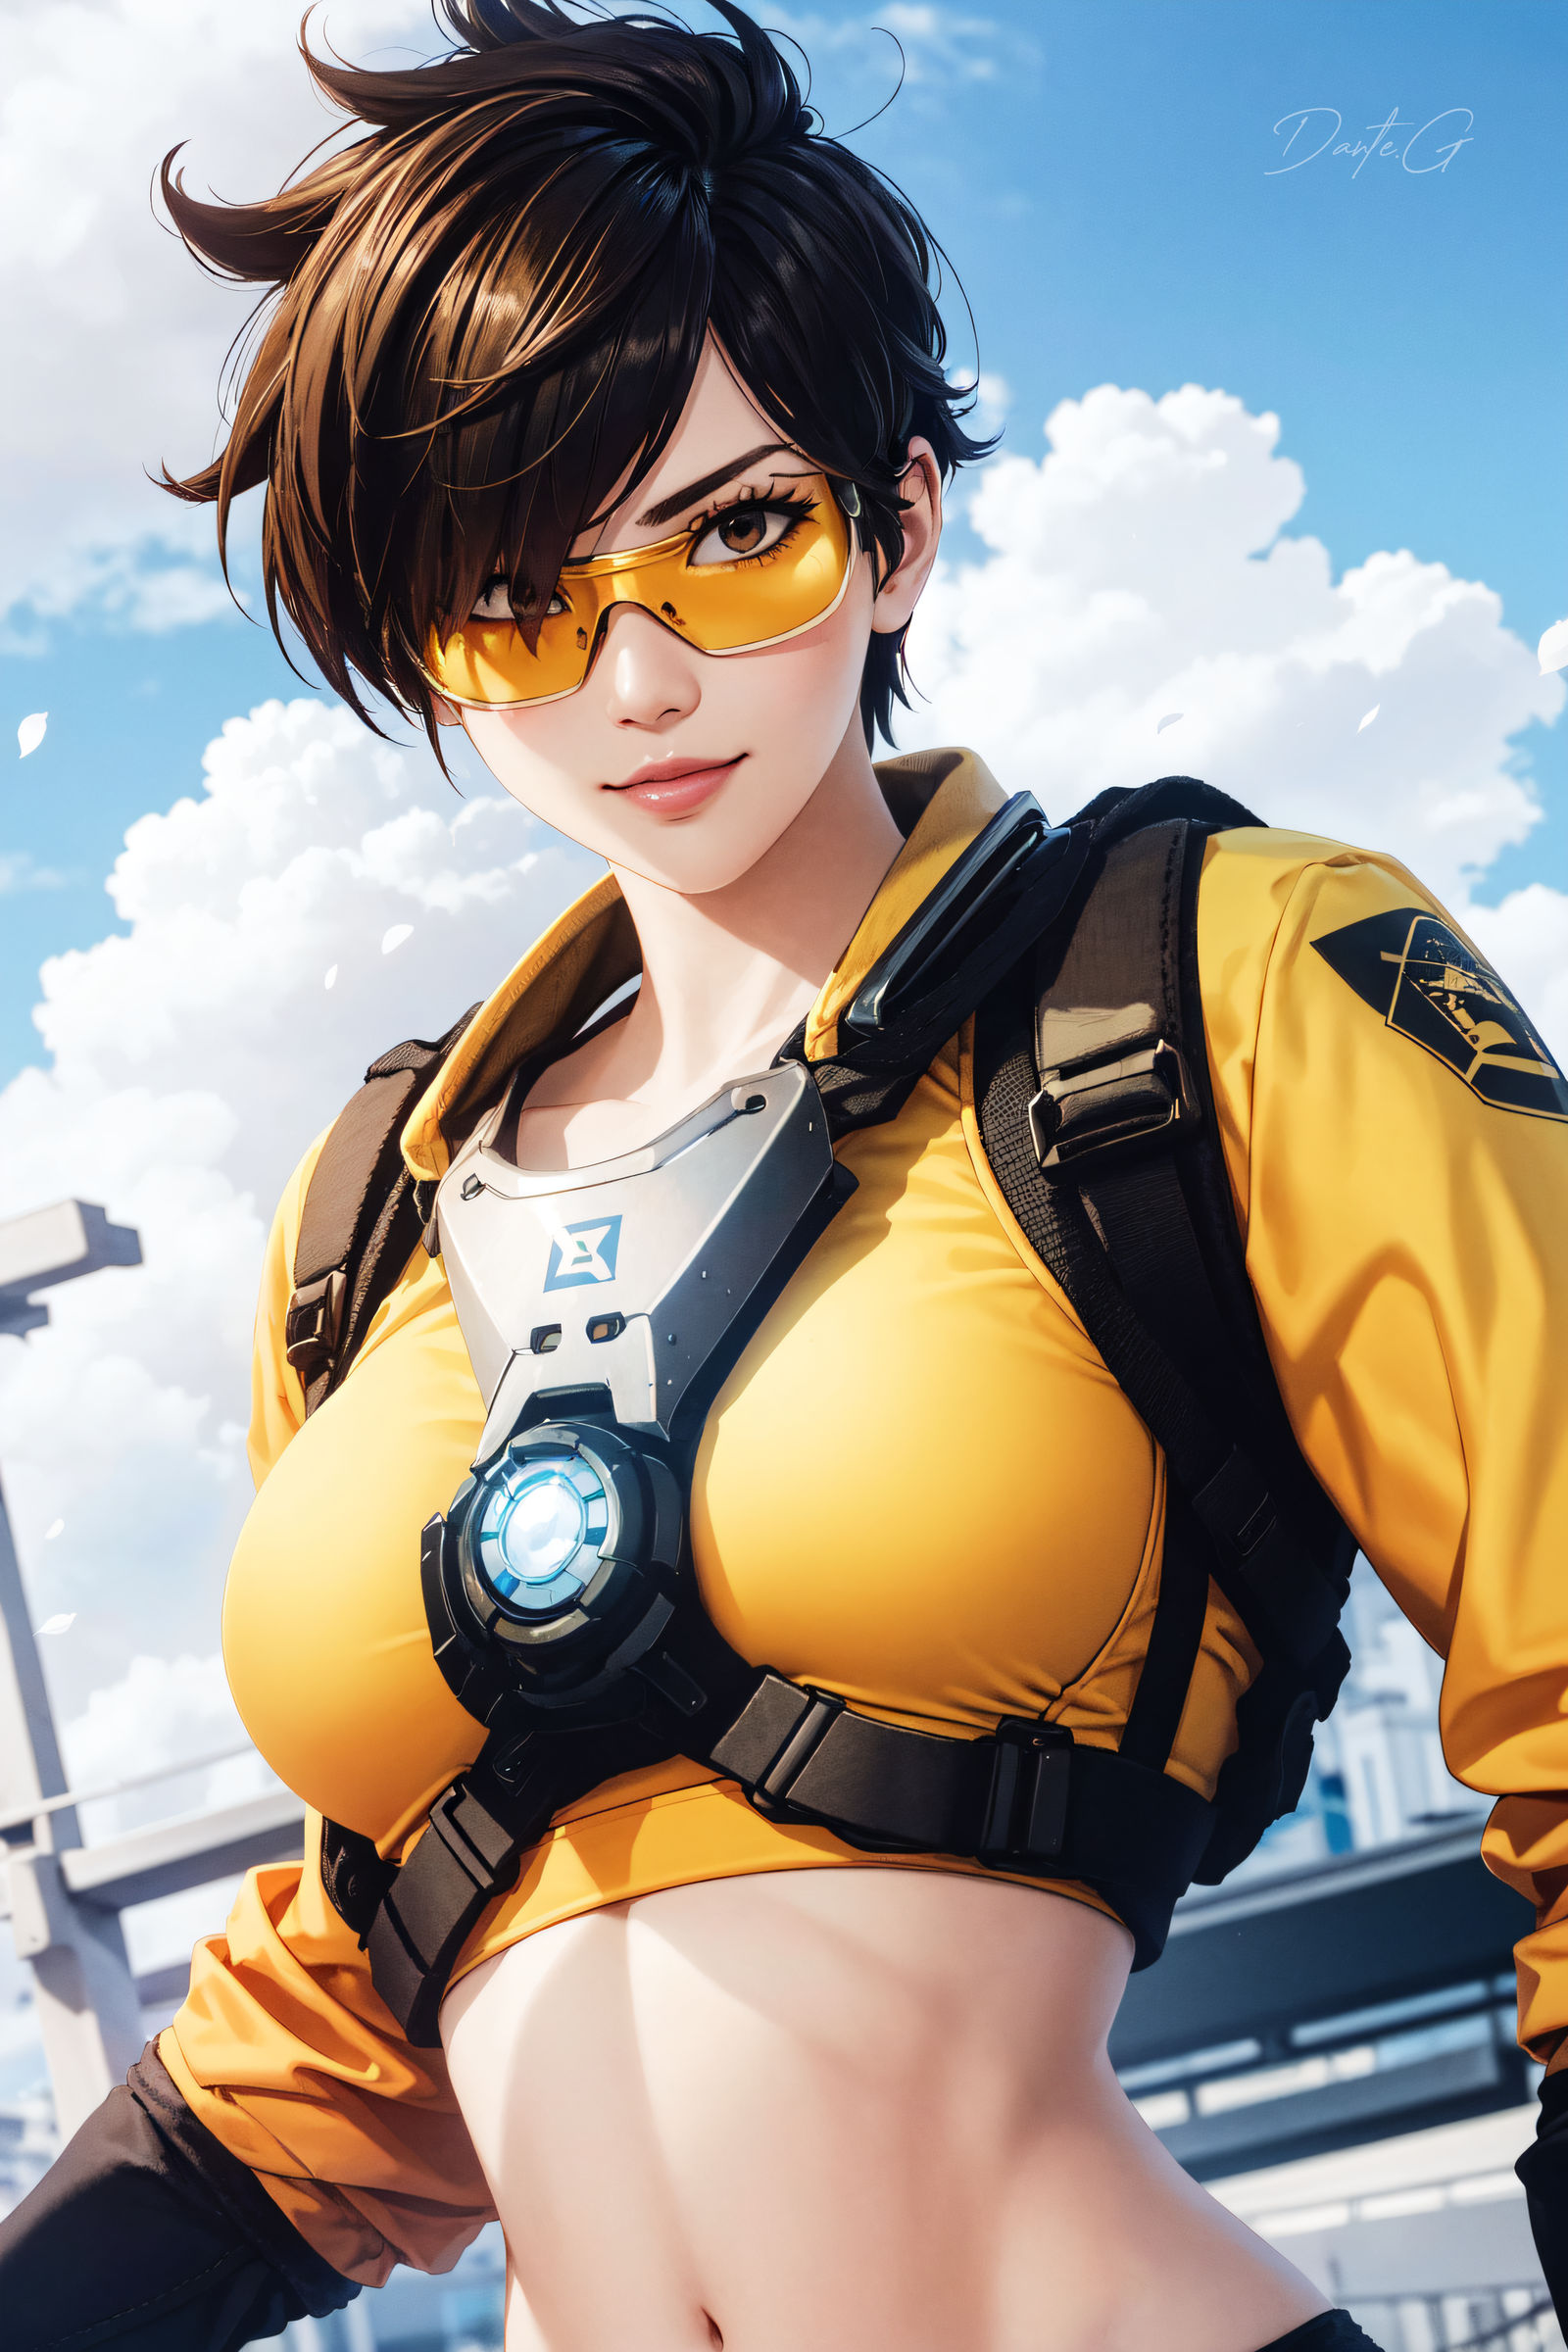 Tracer from Overwatch by Dantegonist on DeviantArt